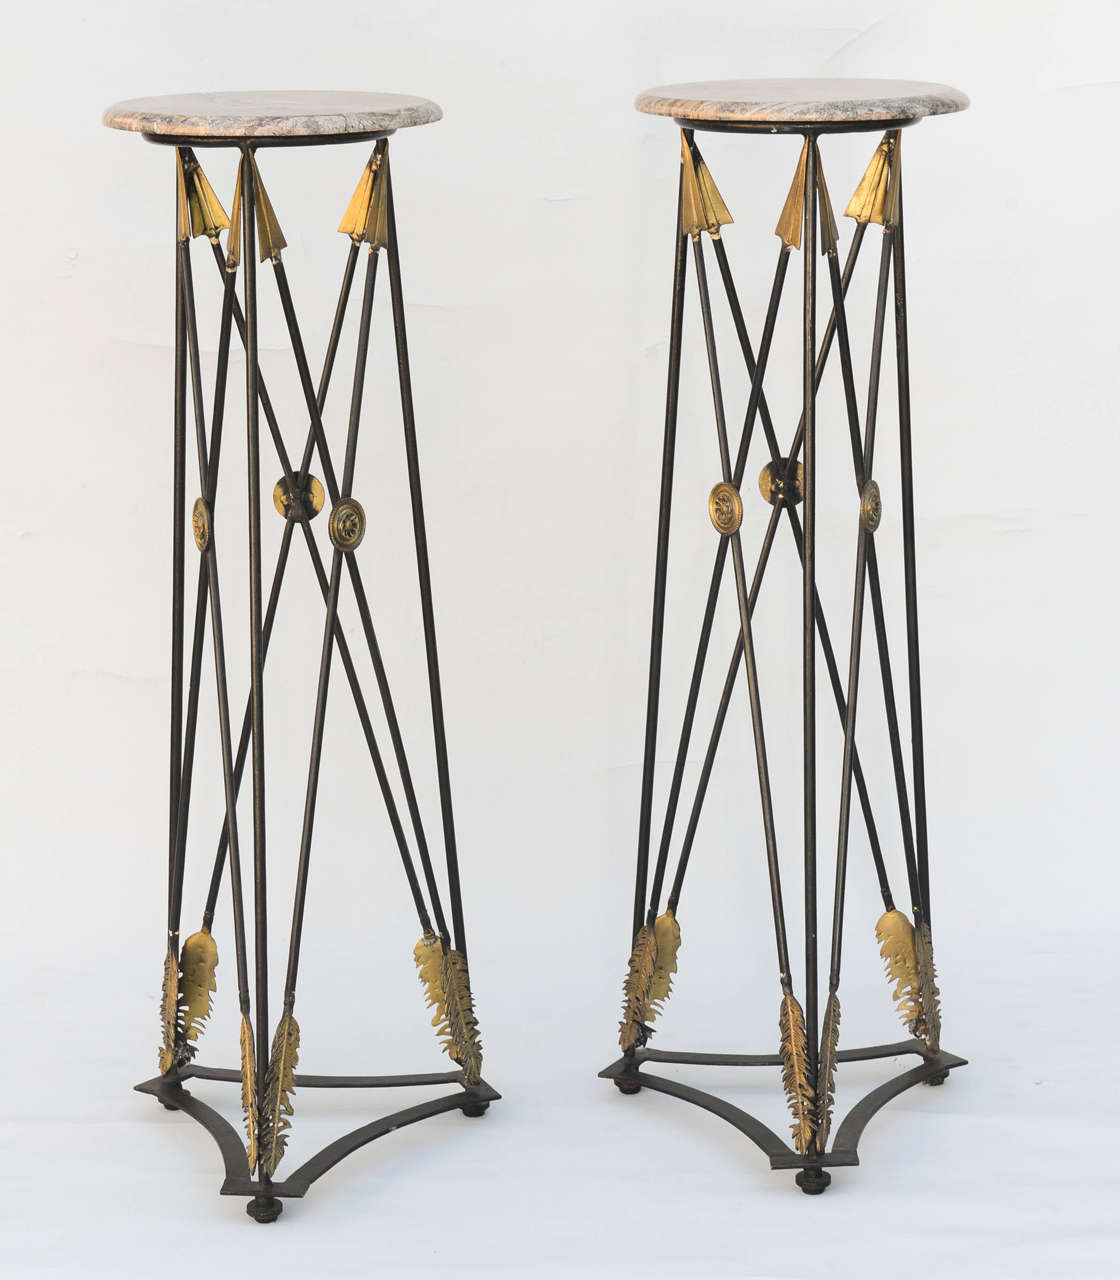 Pair of Directoire-style fern stands, of iron, each having round stone top, raised on iron base of arrows, with gilt accents. Diameter of marble top is 13.25